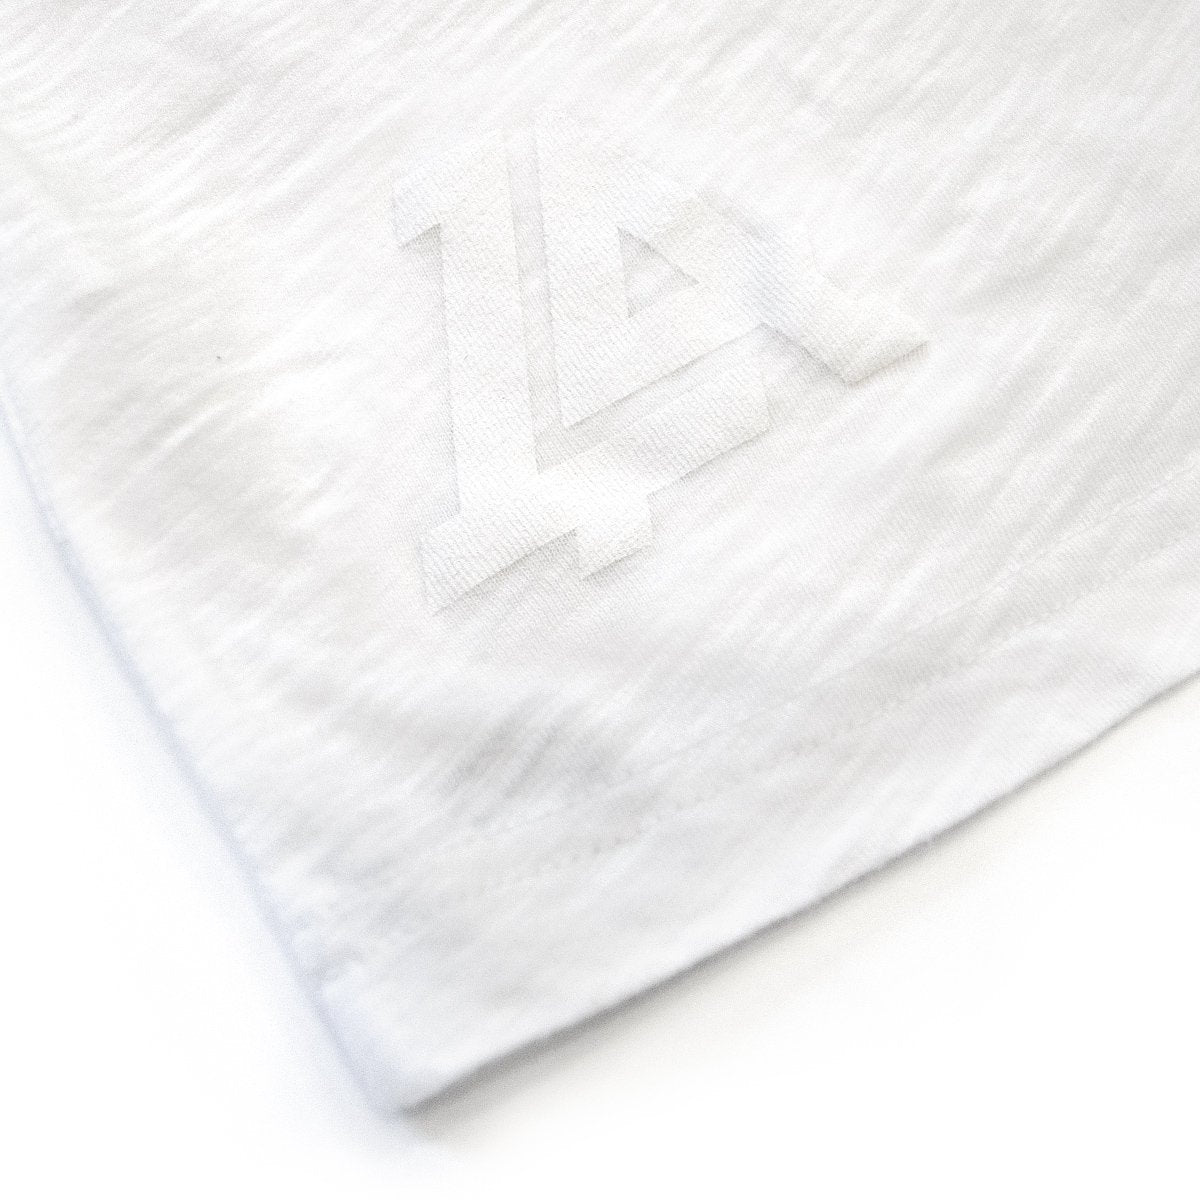 Lost Art Canada - white on white ghost logo tee back screen print view